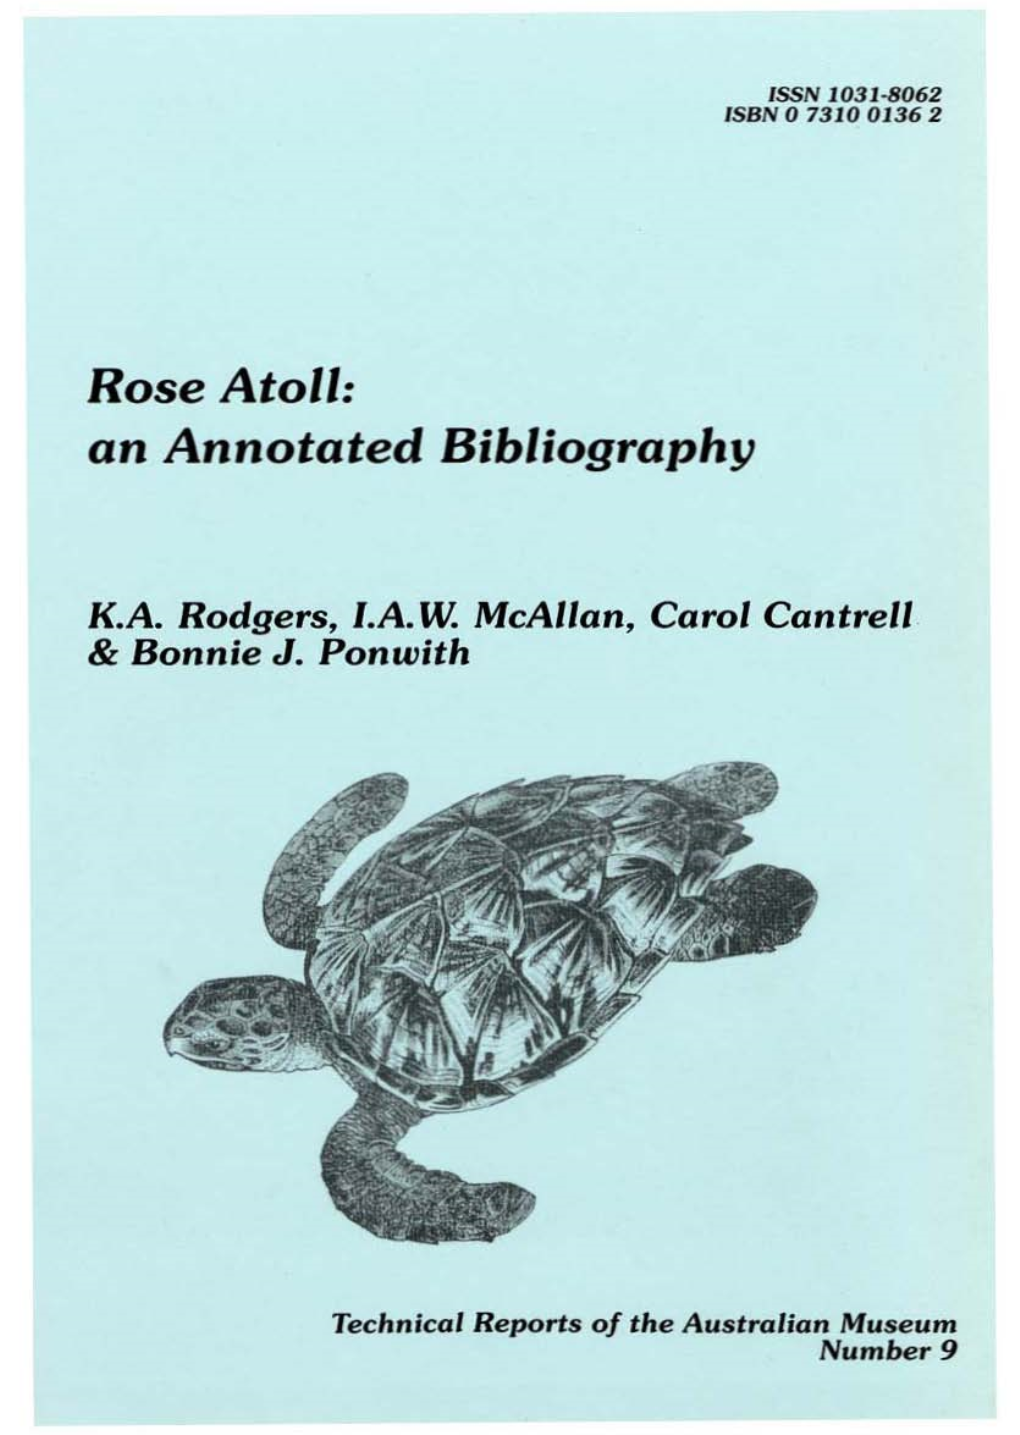 Rose Atoll: an Annotated Bibliography